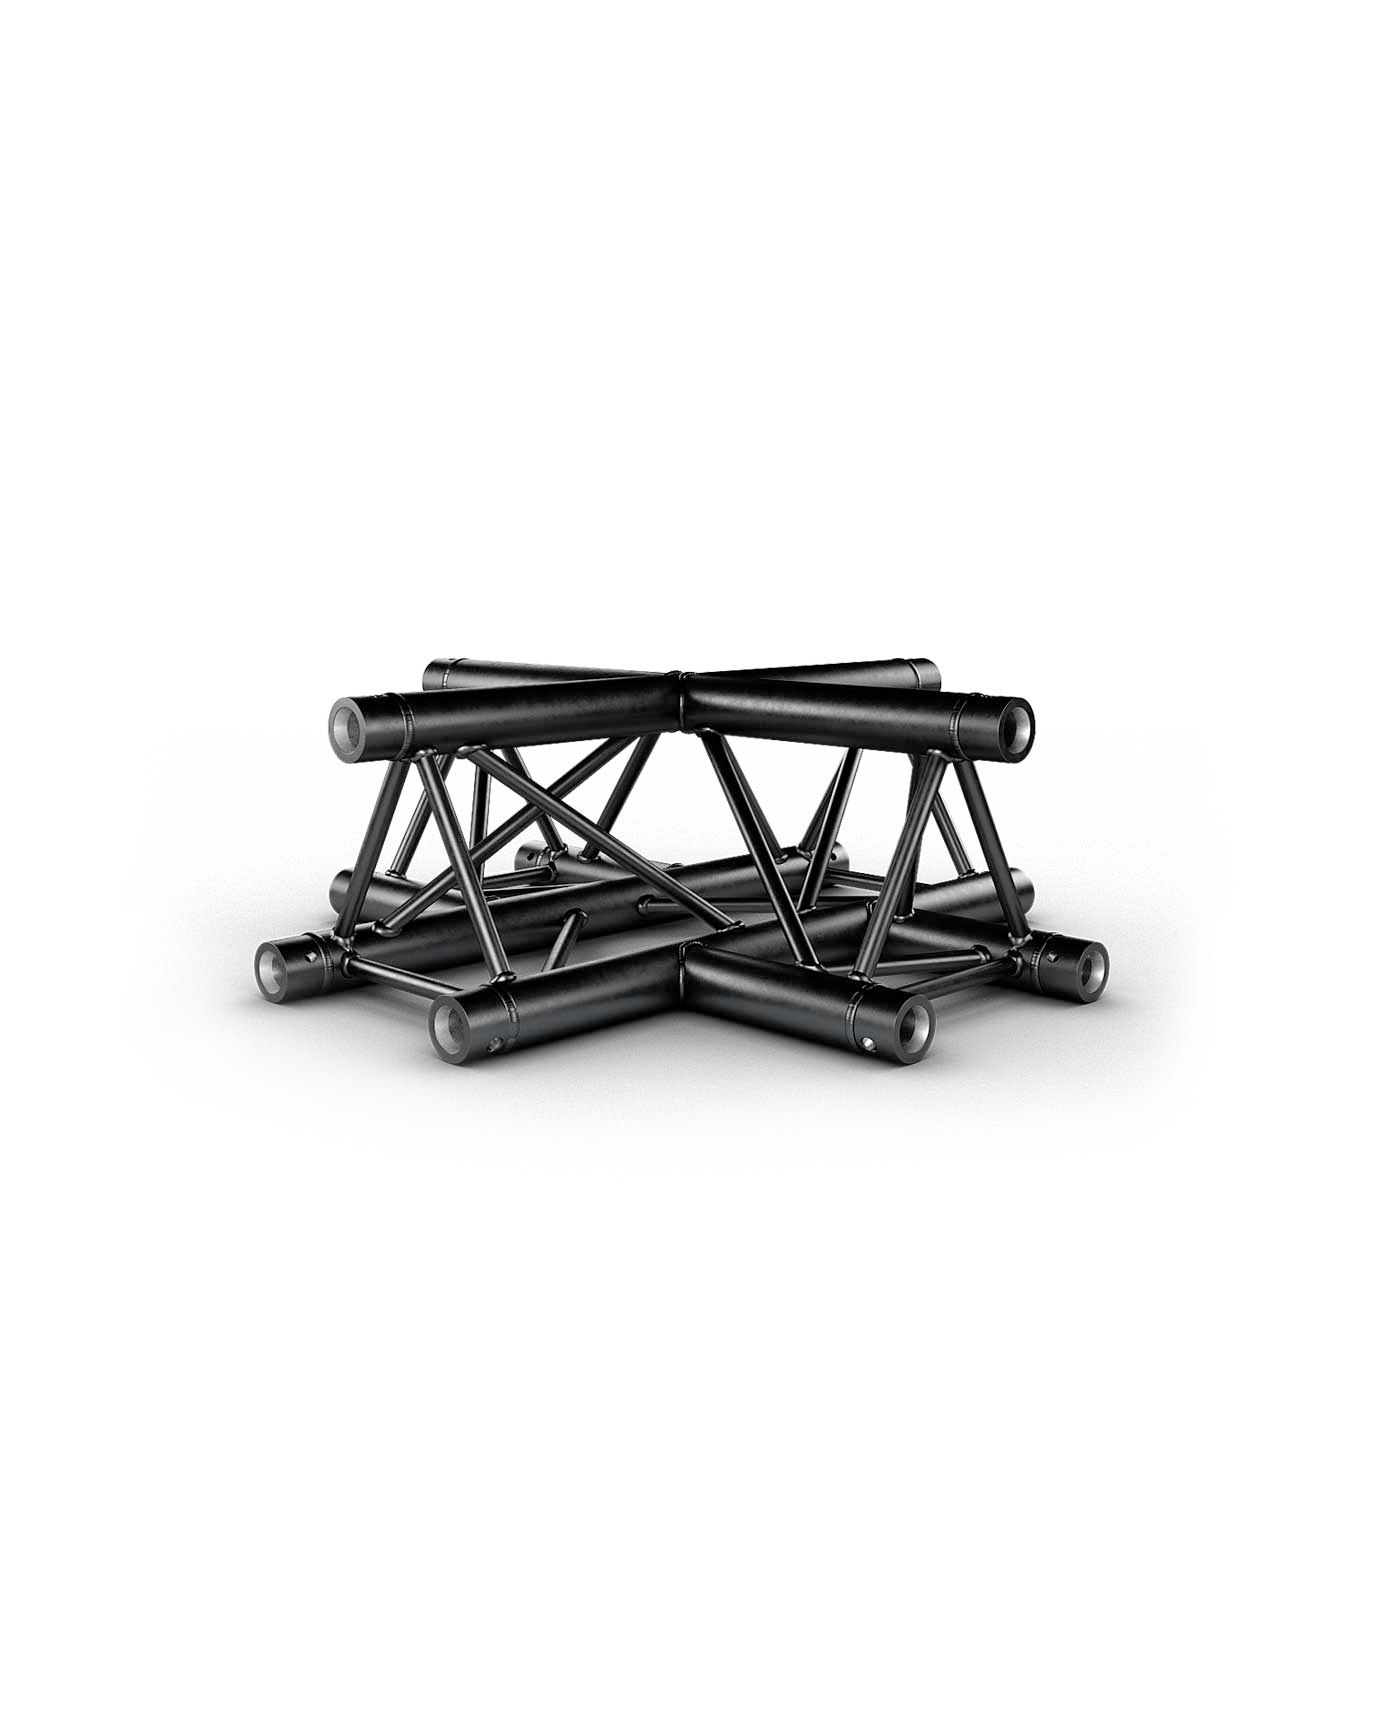 TRUSS TRIO 290 Cross - Black - 4 directions - Connection kits included